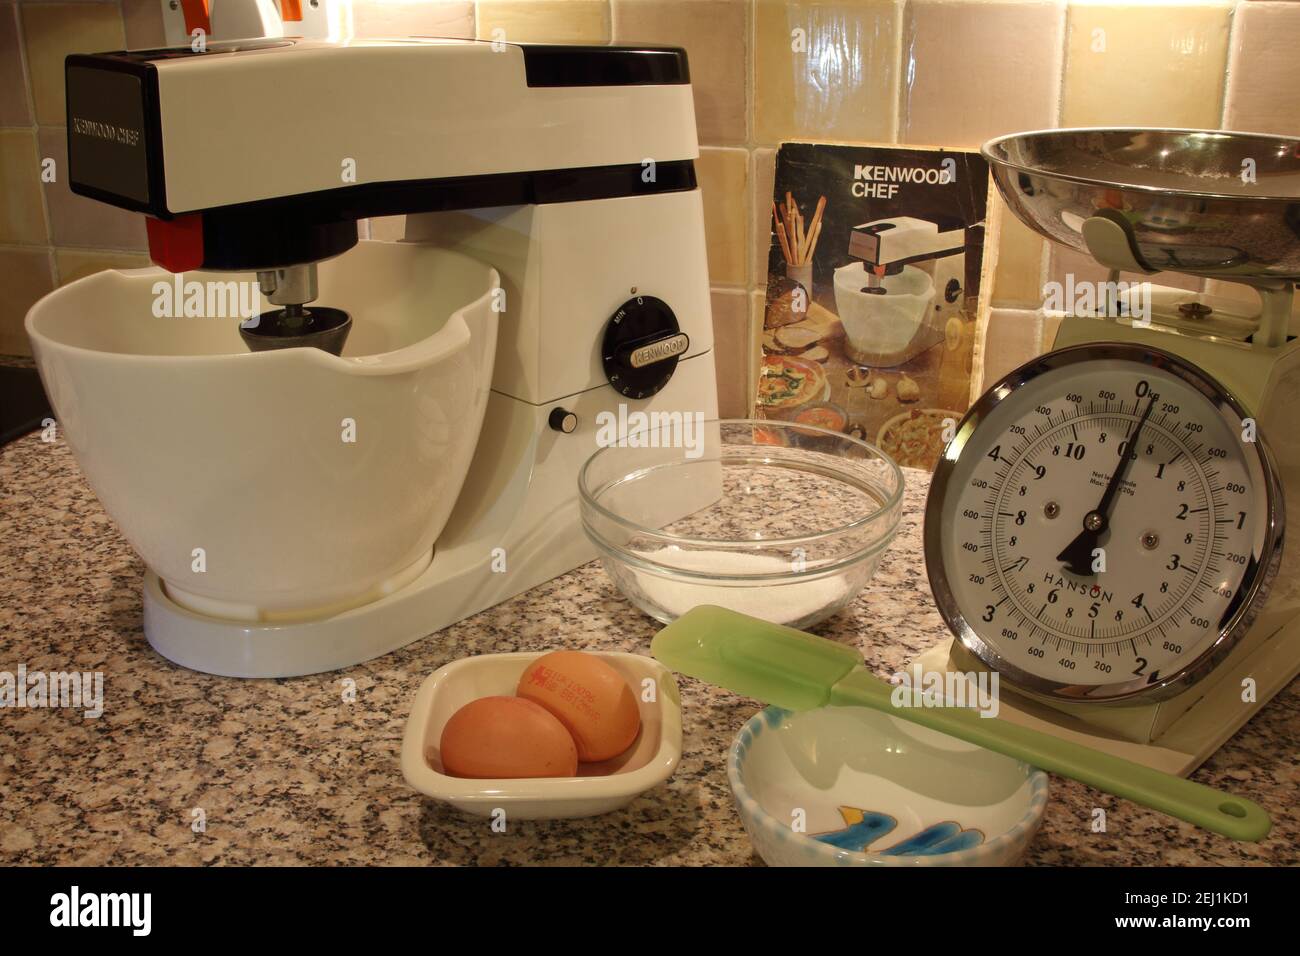 Kenwood Chef mixer and weighing scales with several bowls of ingredients  weighed out ready to start baking. Ready tidy and prepared to cook or bake  Stock Photo - Alamy